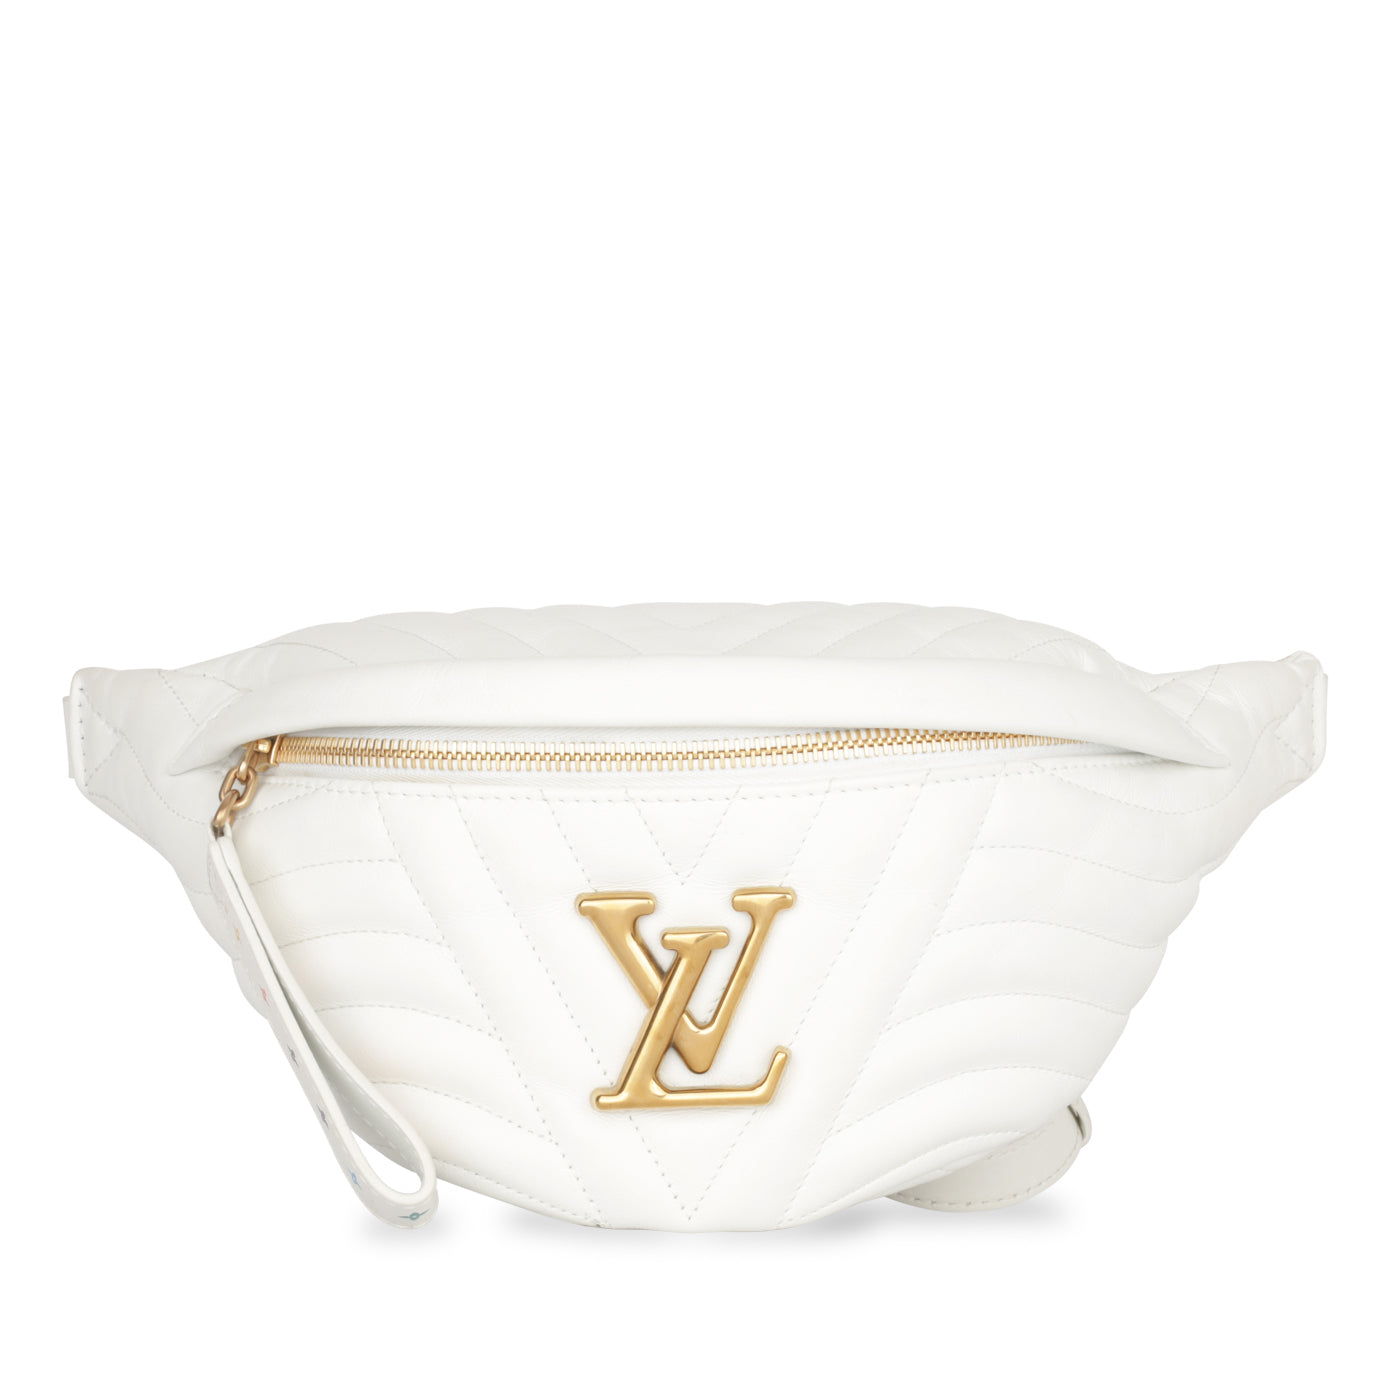 Louis Vuitton's Latest New Wave Bags Include a Chic Logo Bumbag